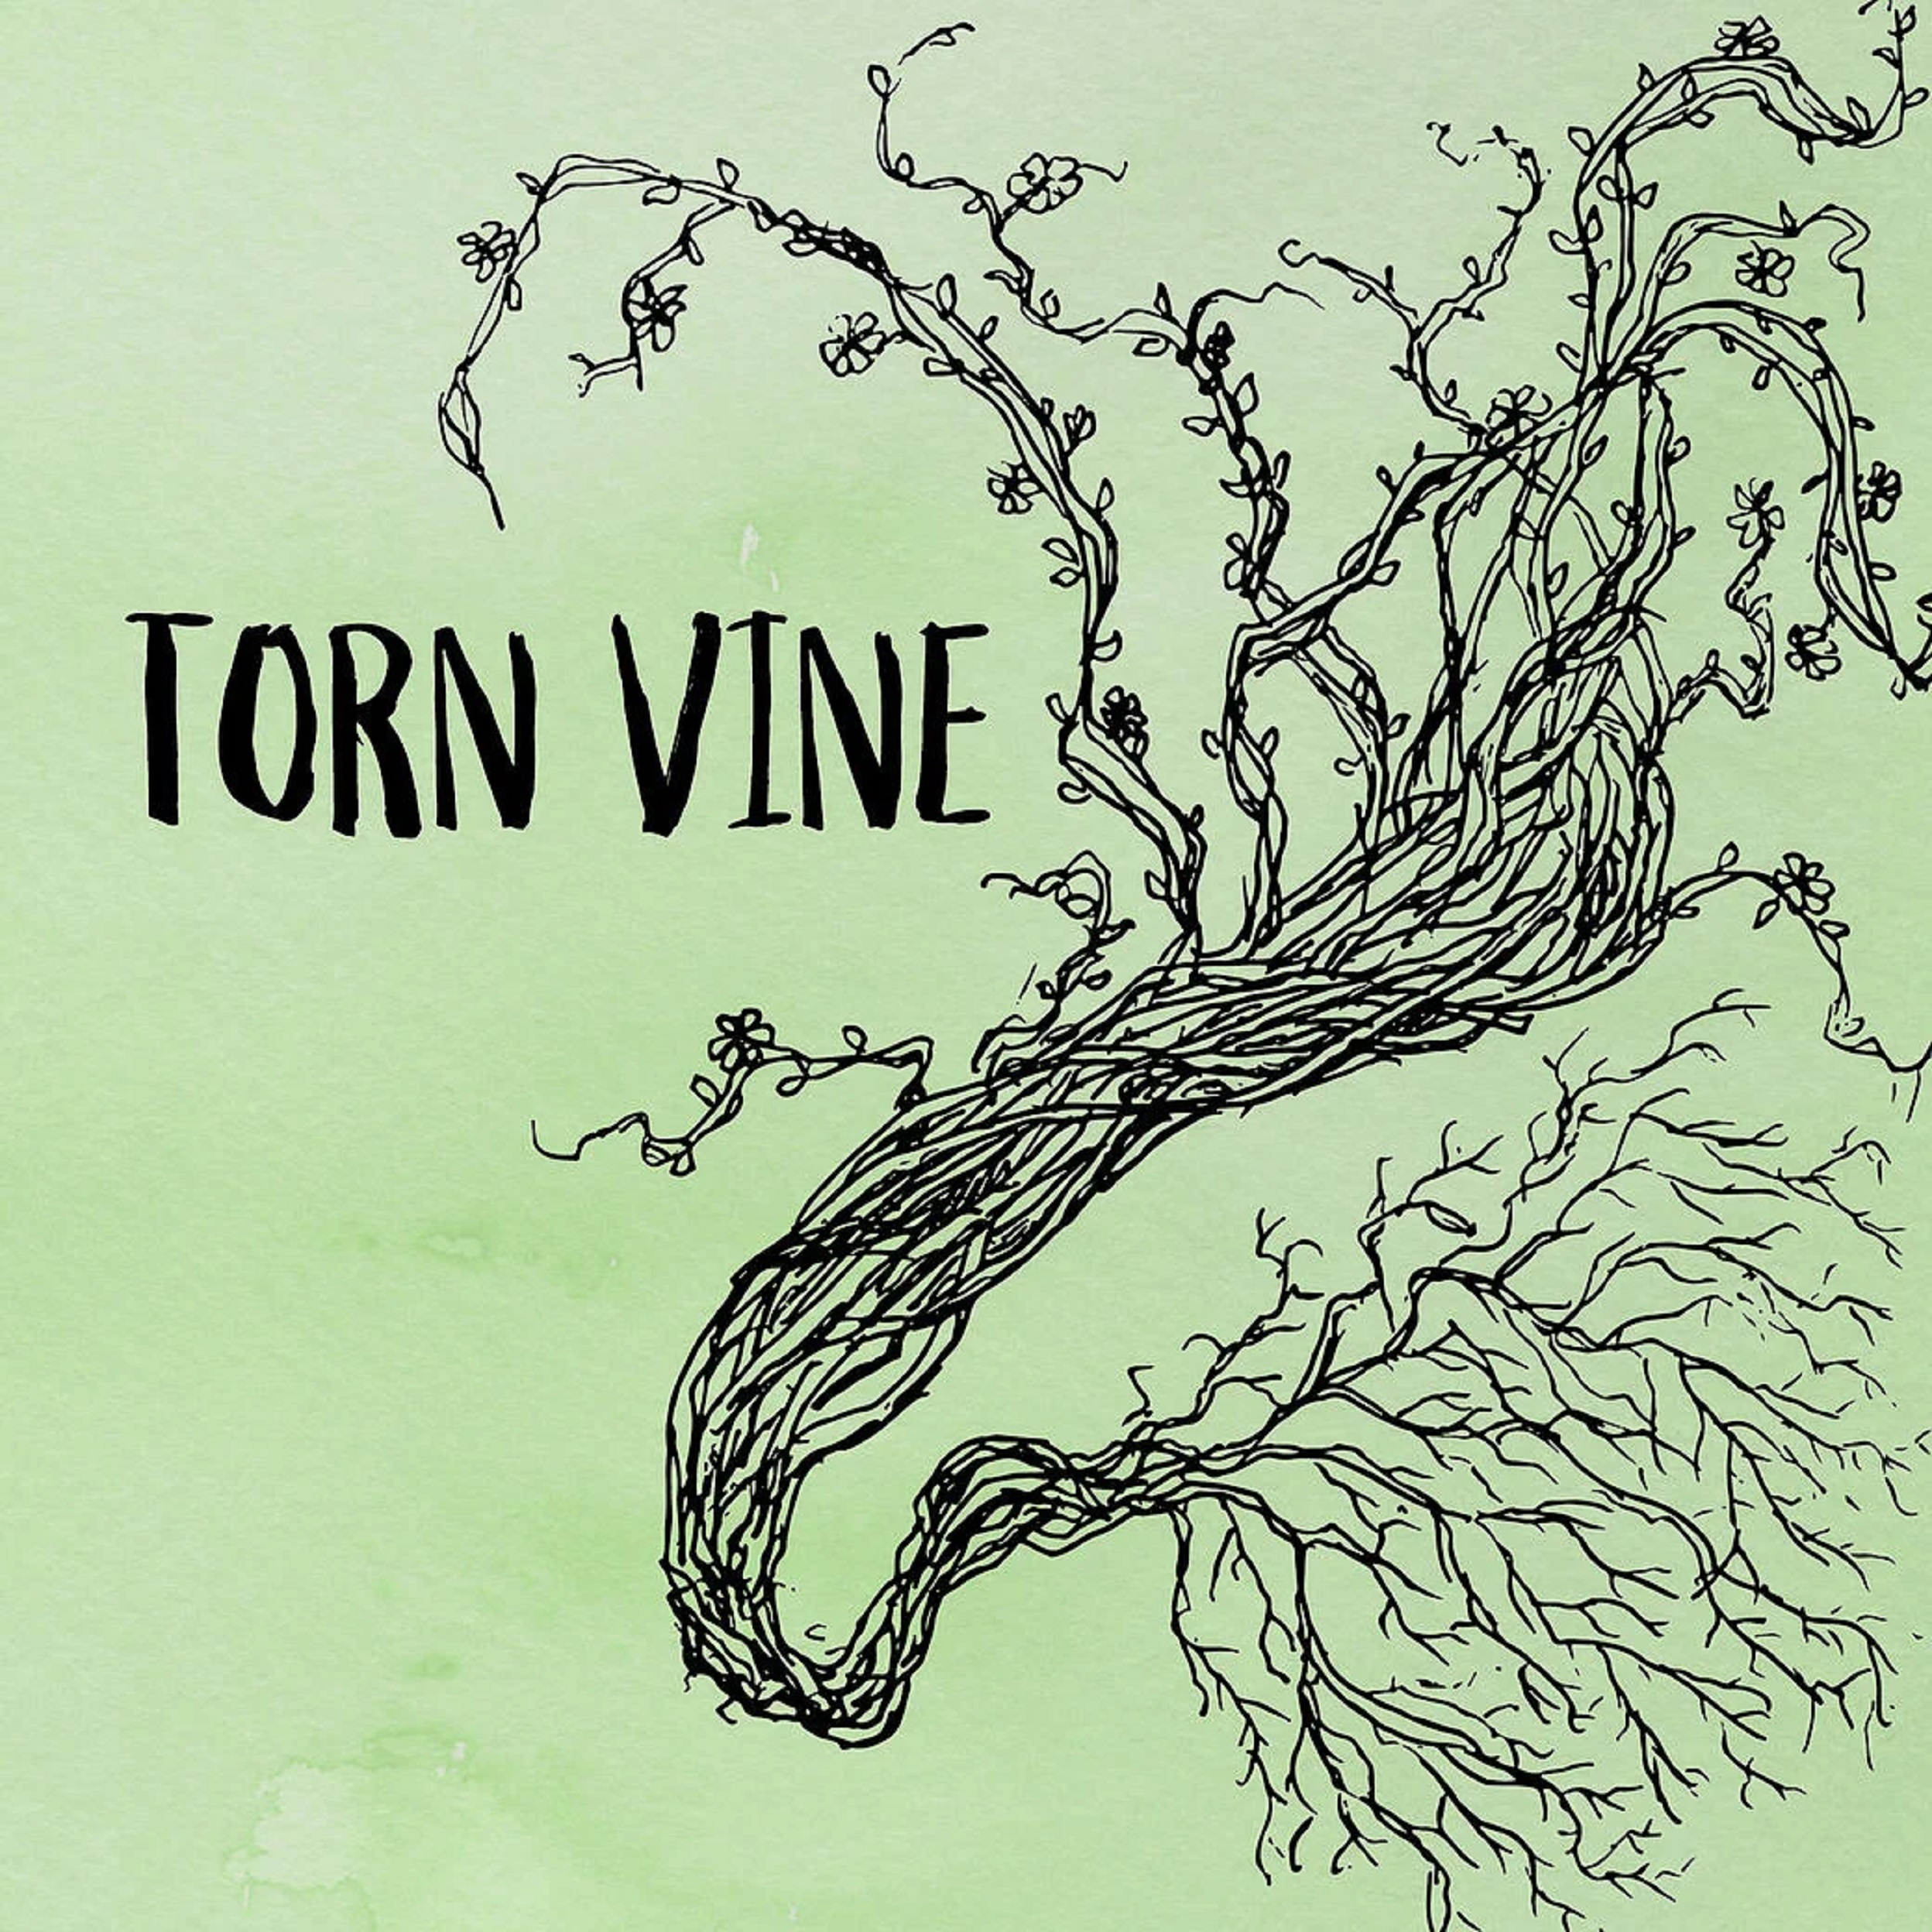 The A.M.s Release Debut Single, “Torn Vine”